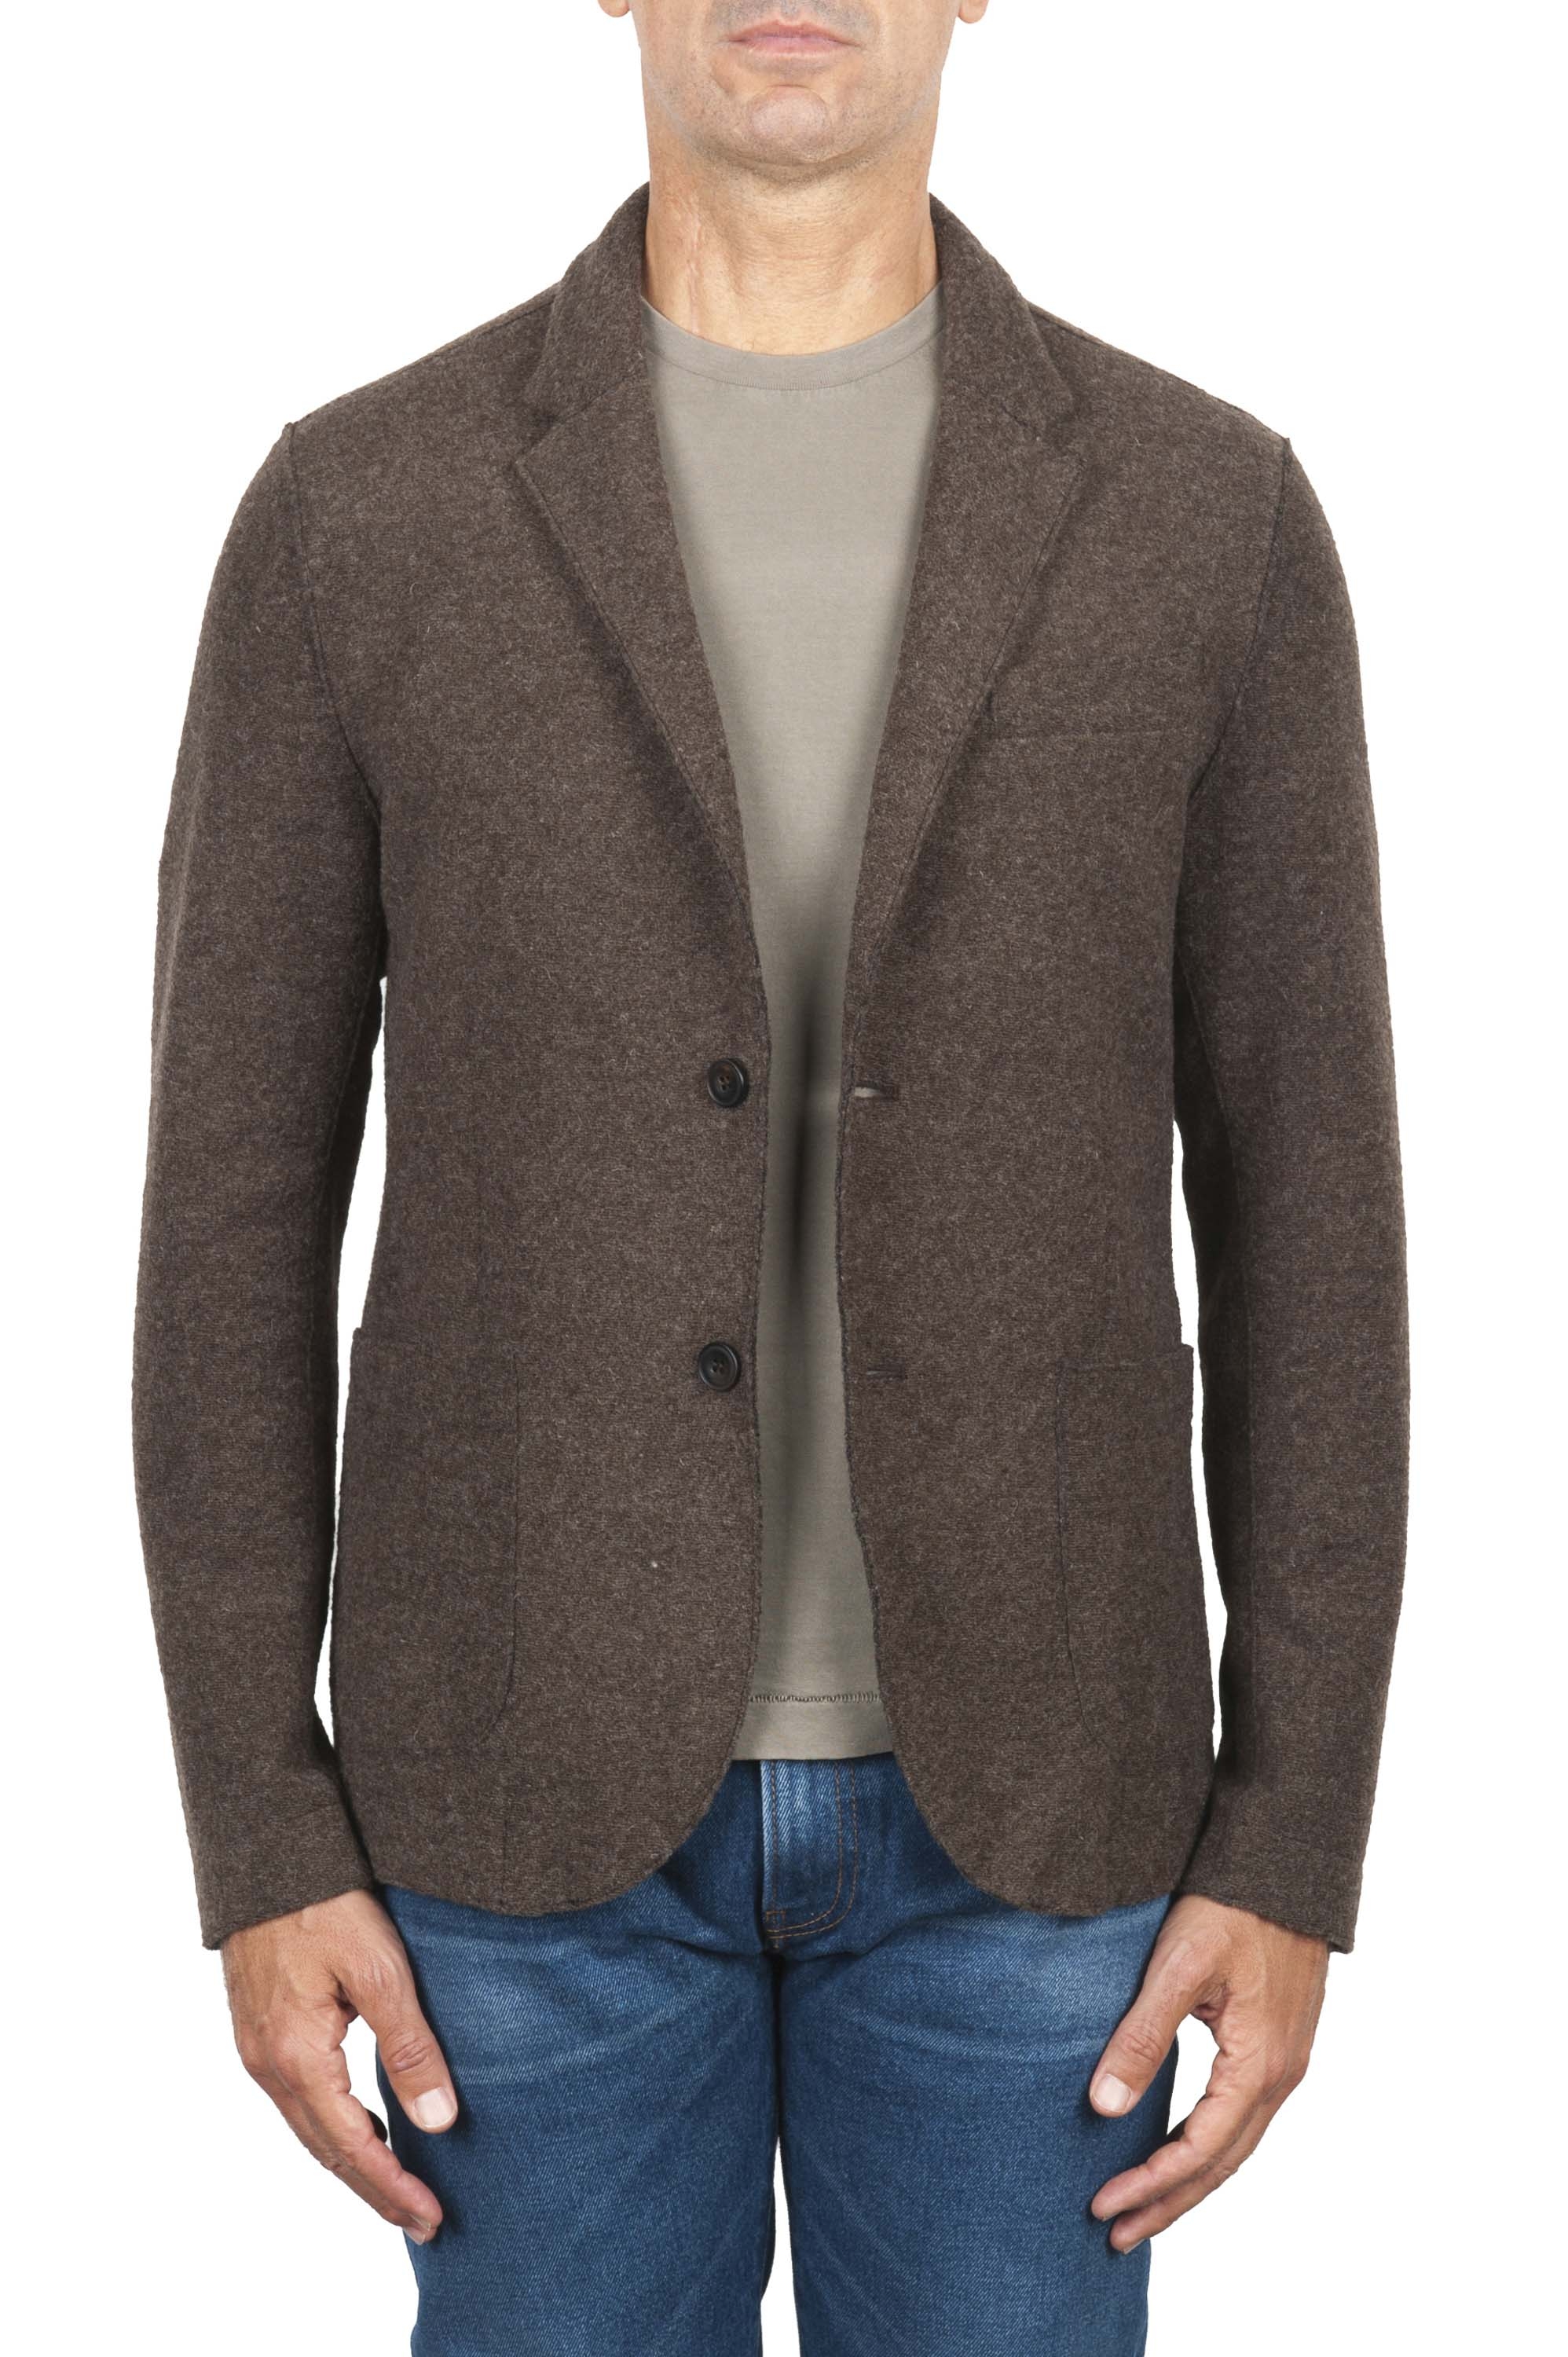 SBU 03457_2021AW Brown wool blend sport jacket unconstructed and unlined 01